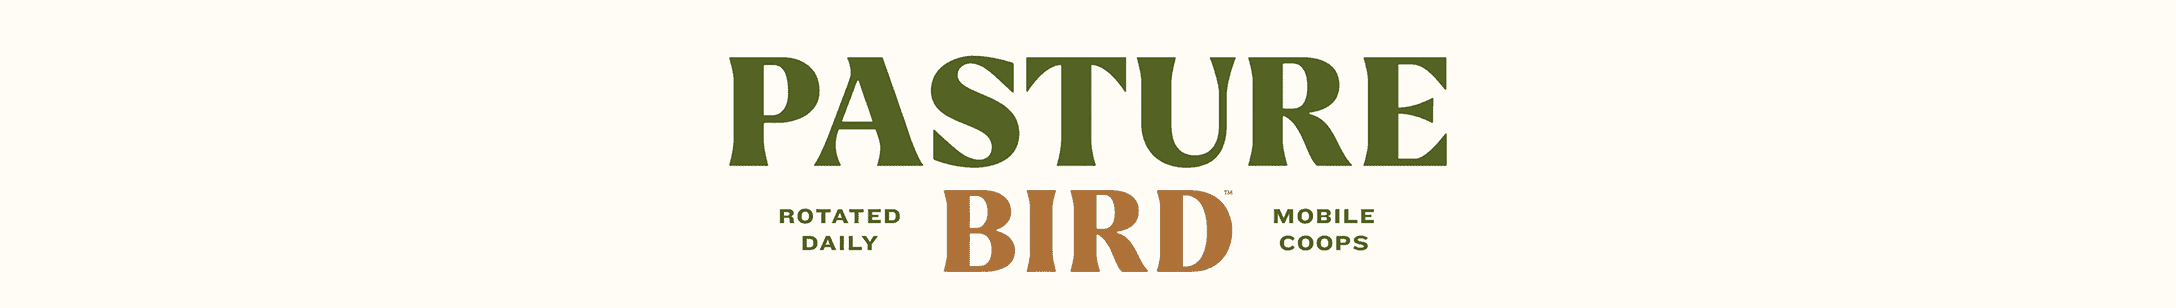 Pasture Bird logo. Subtext: rotated daily, mobile coops